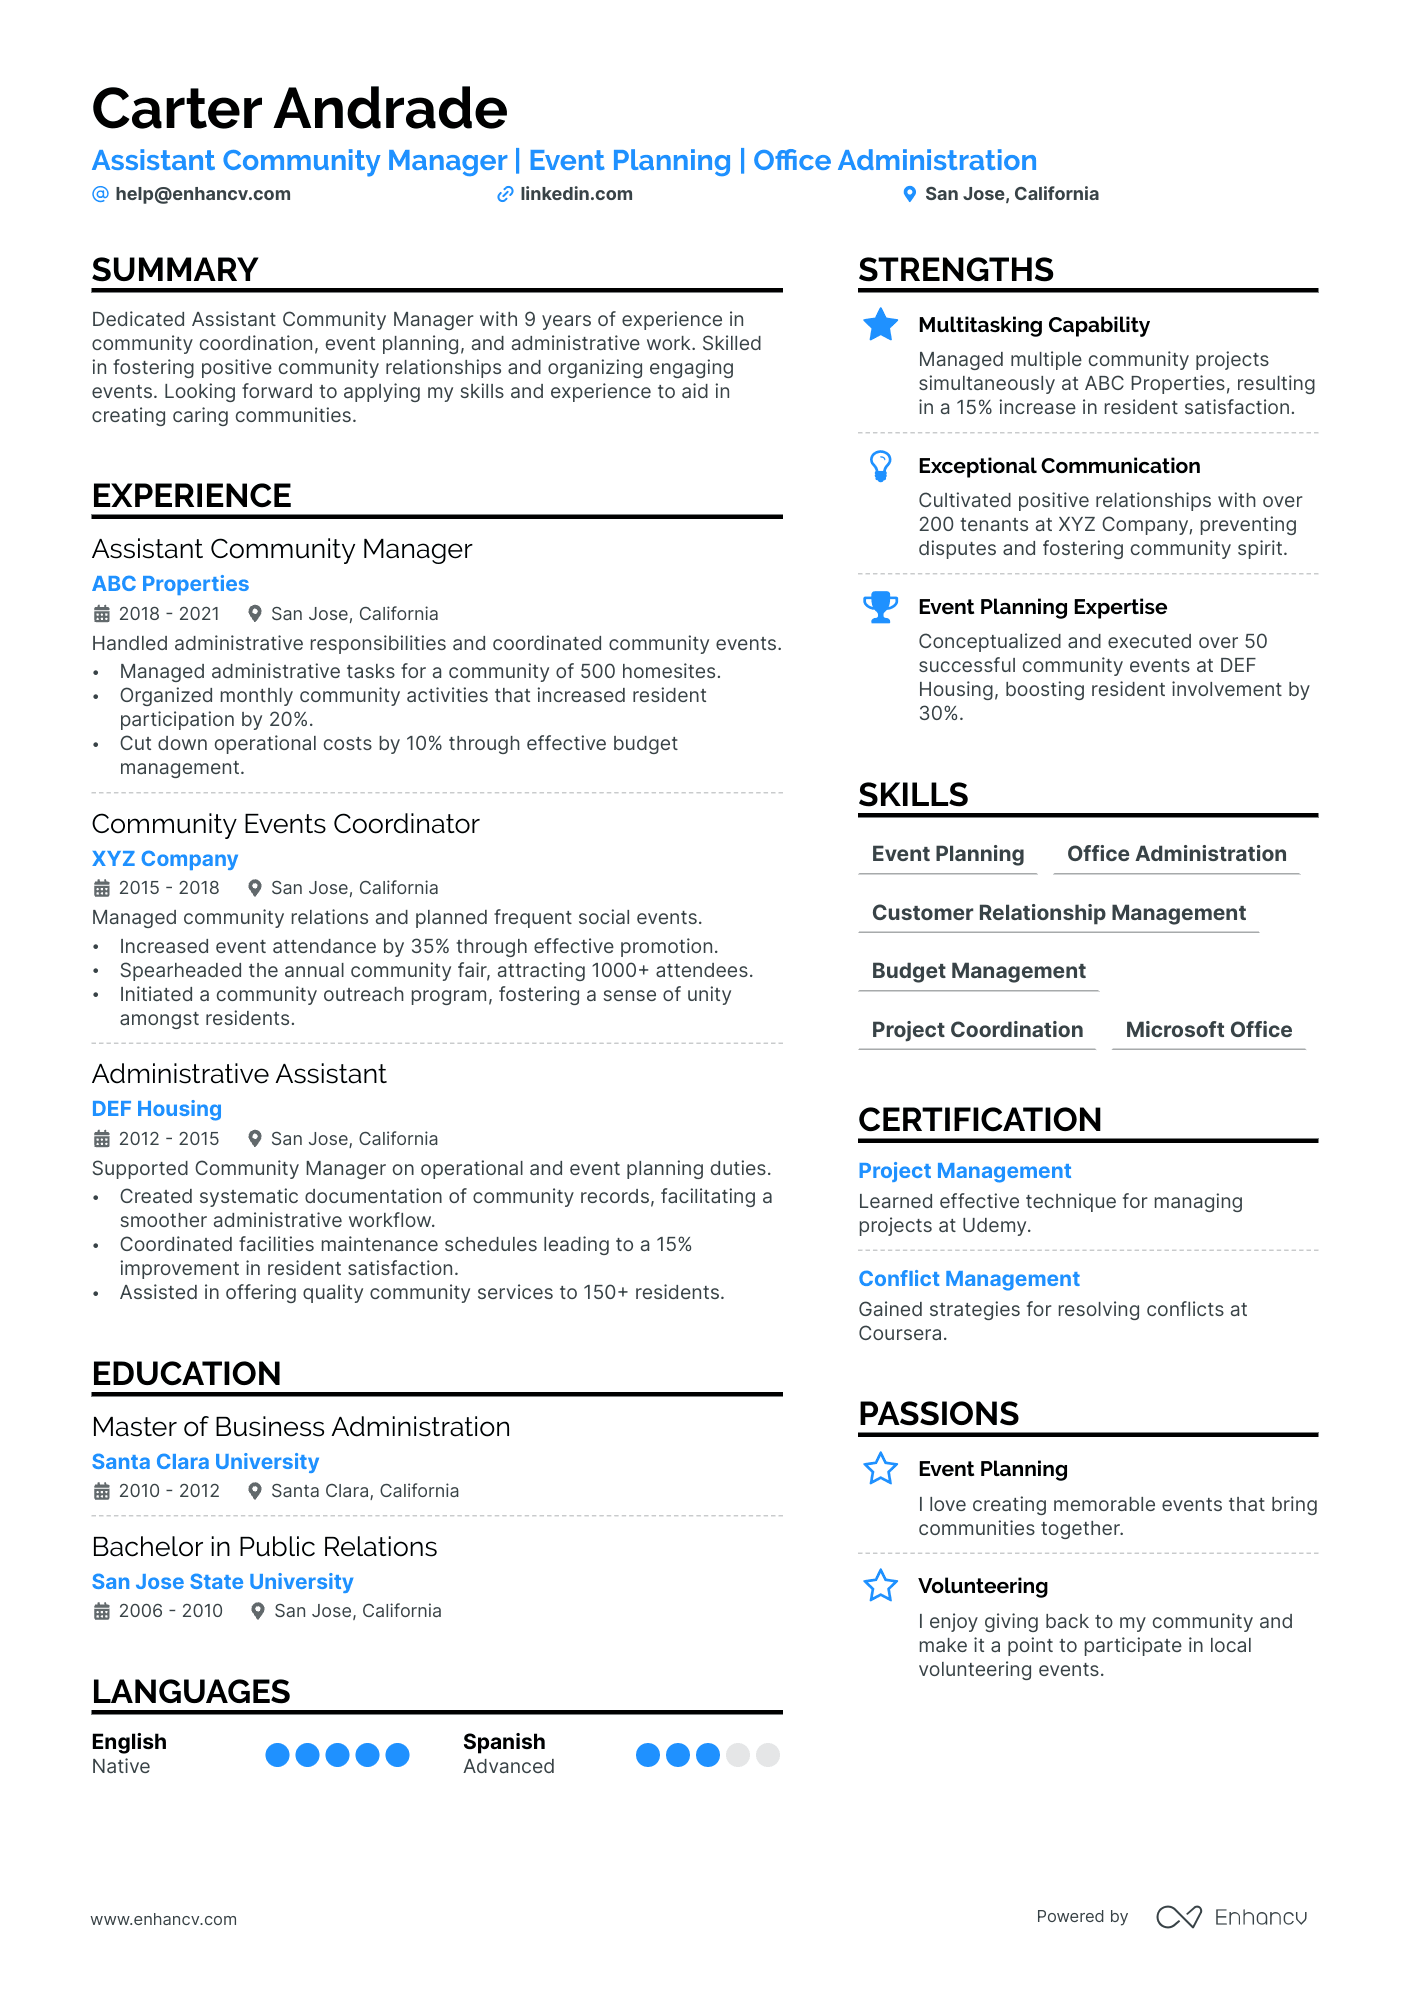 Assistant Community Manager resume example